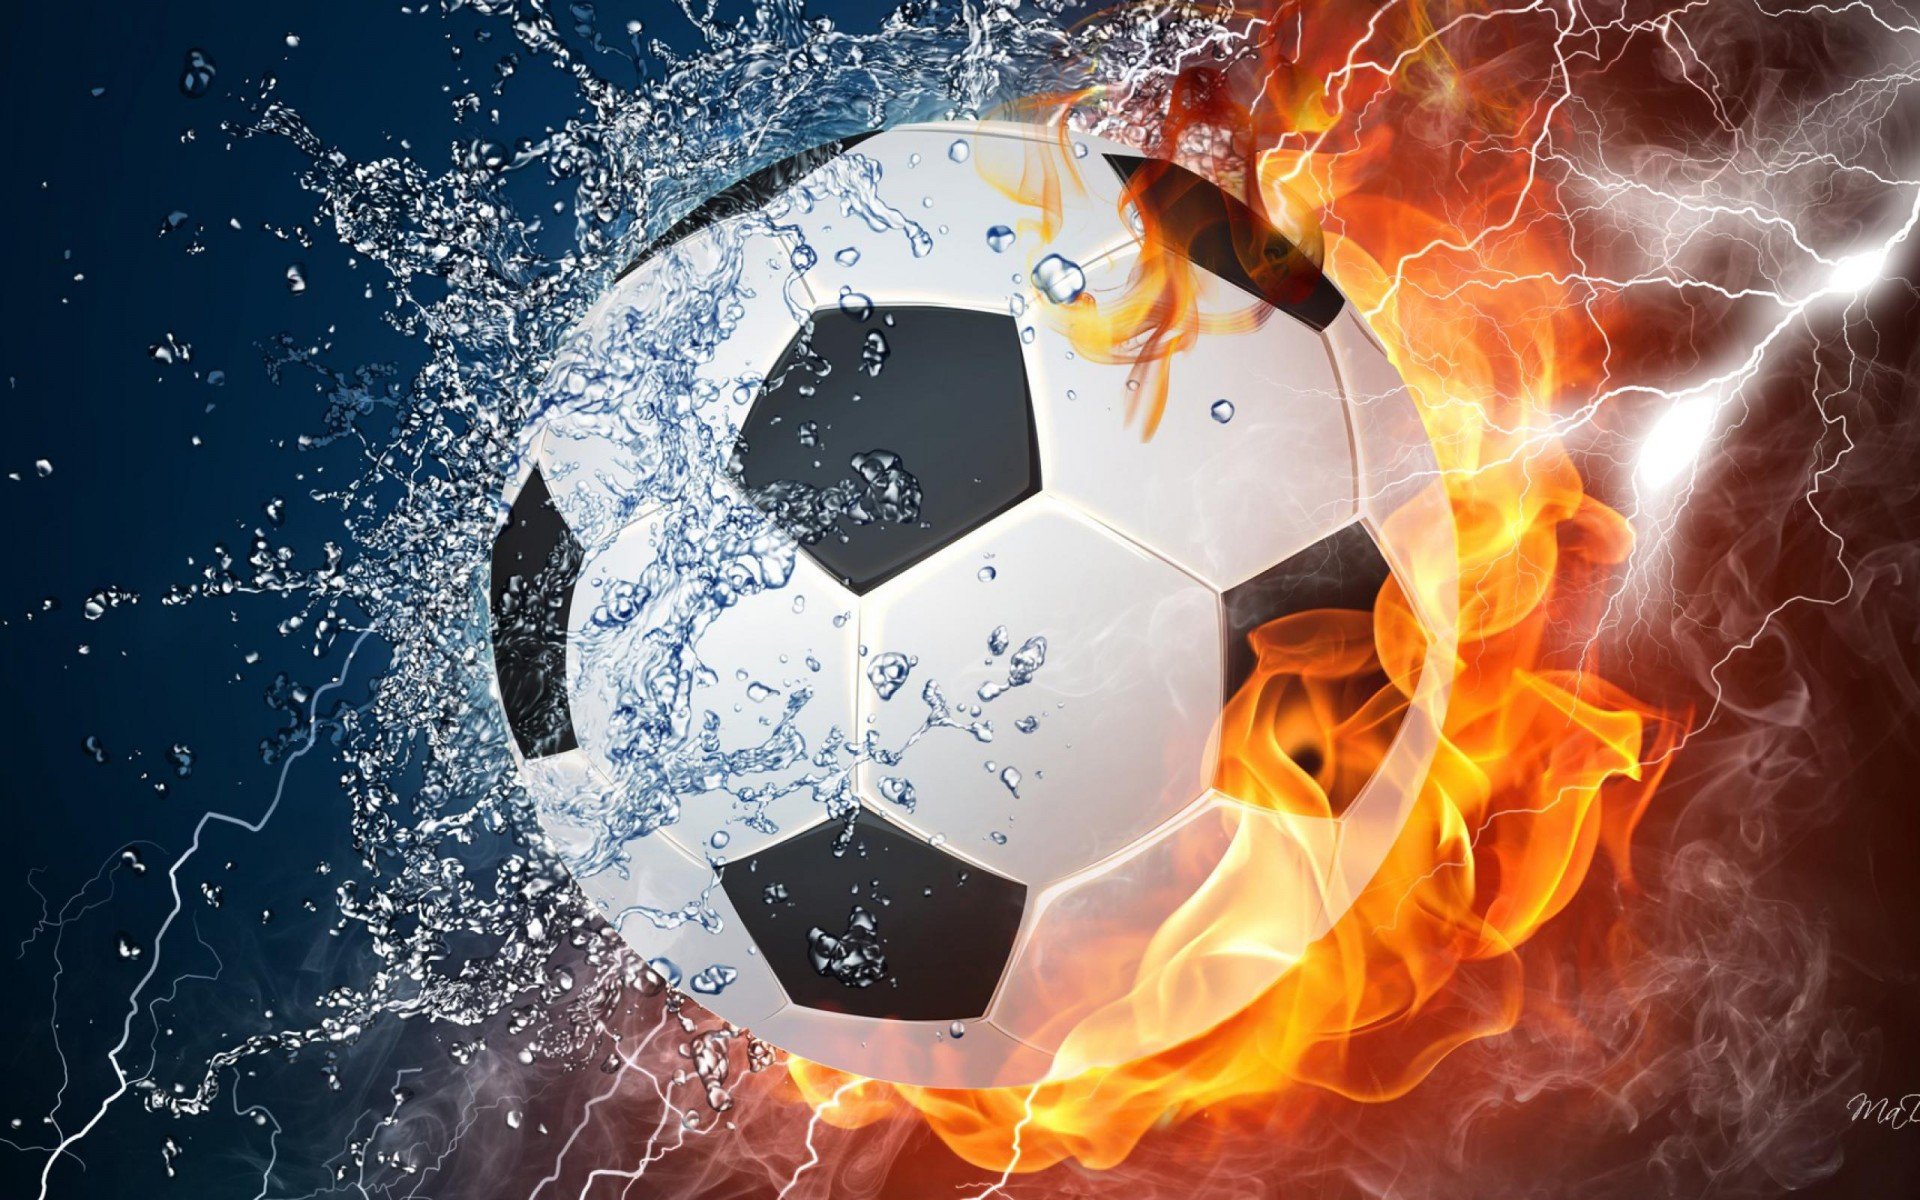 Free download Soccer Ball On Fire wallpaper 999236 [1920x1200] for your Desktop, Mobile & Tablet. Explore Flaming Soccer Ball Wallpaper. Flaming Soccer Ball Wallpaper, Soccer Ball Wallpaper, Soccer Ball Wallpaper